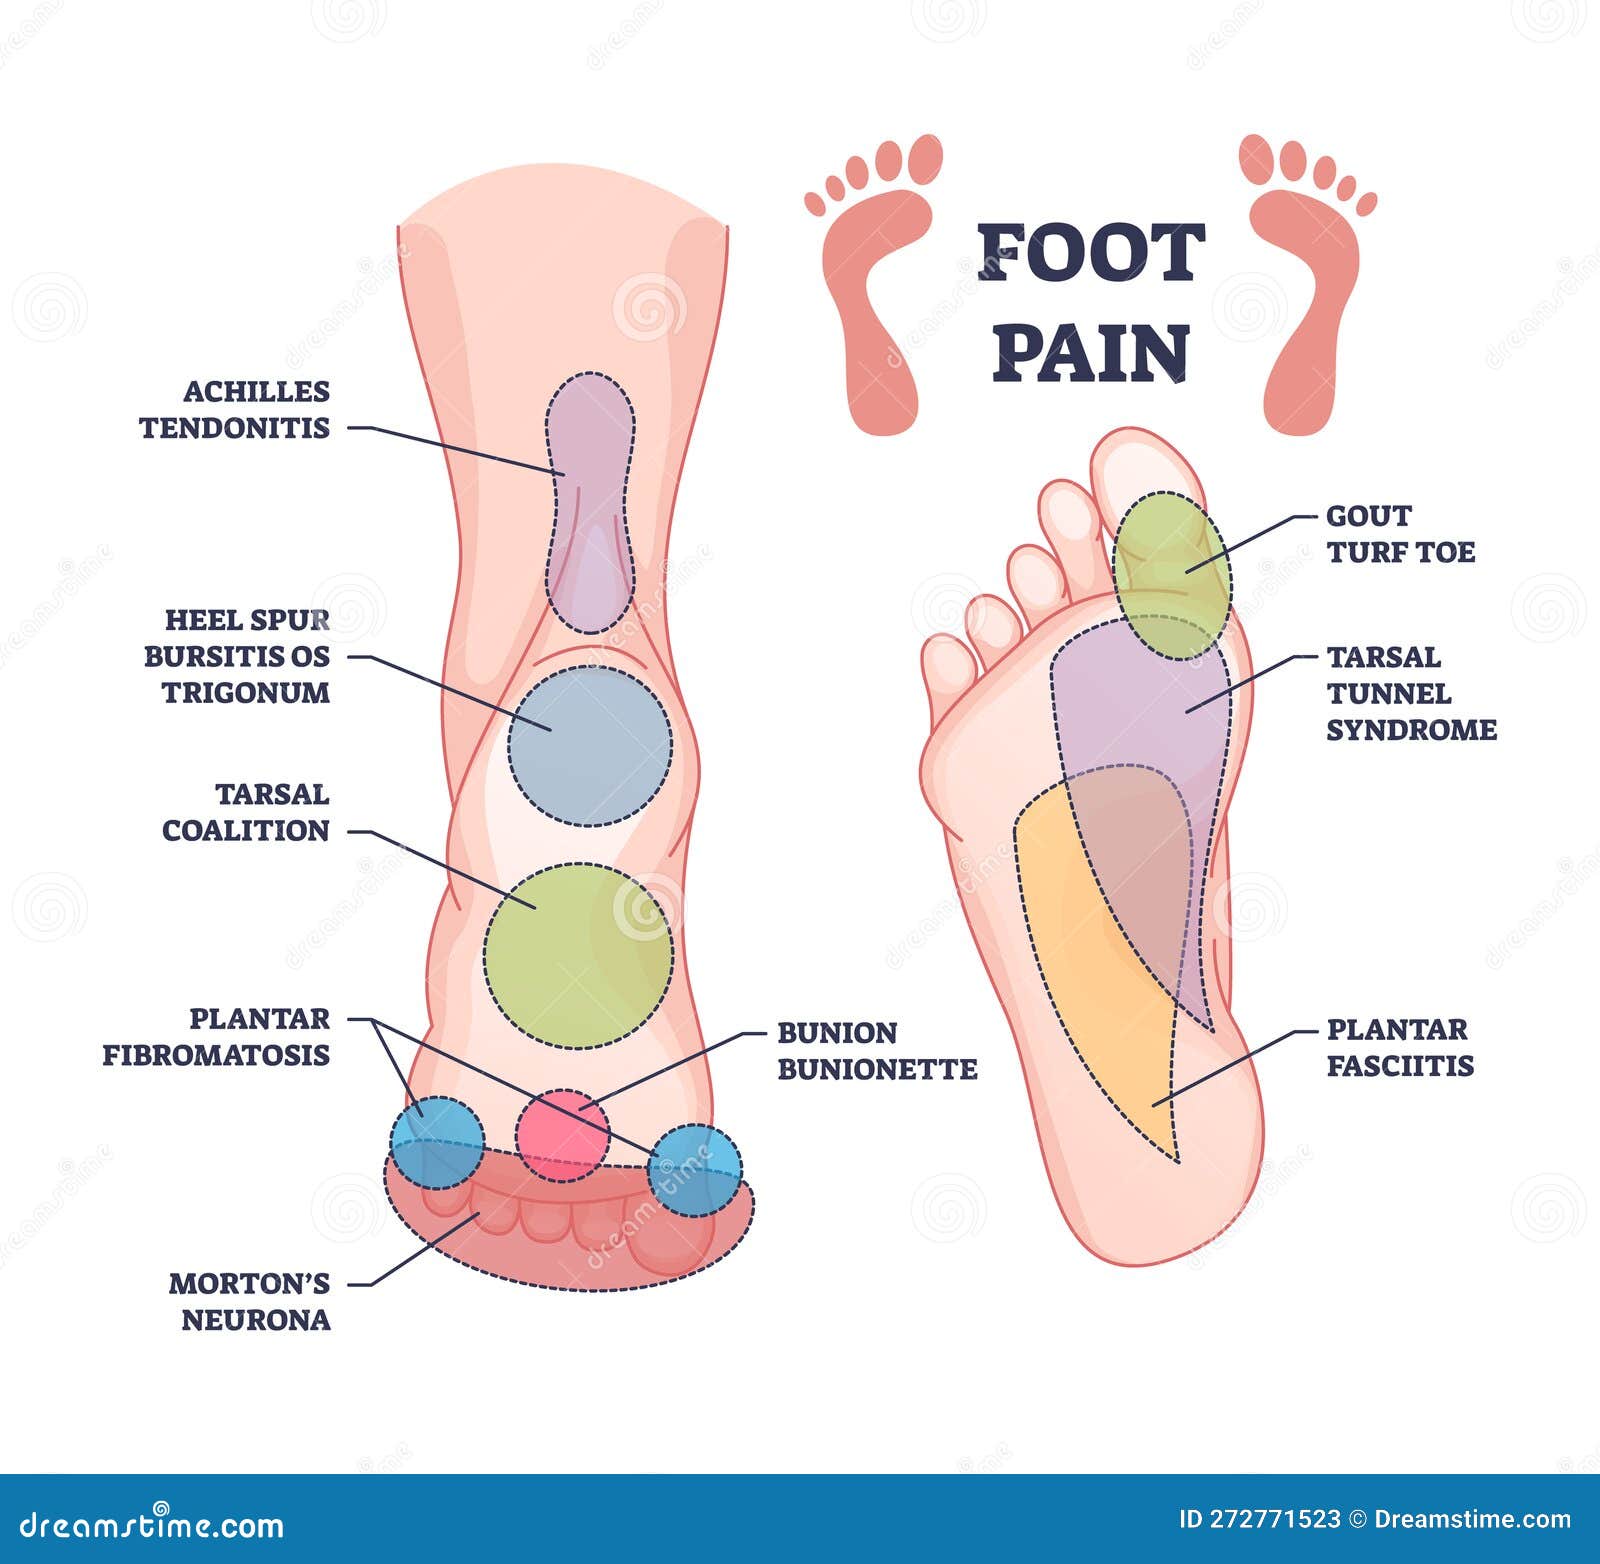 foot pain causes from zones diagnosis and painful spots areas outline diagram